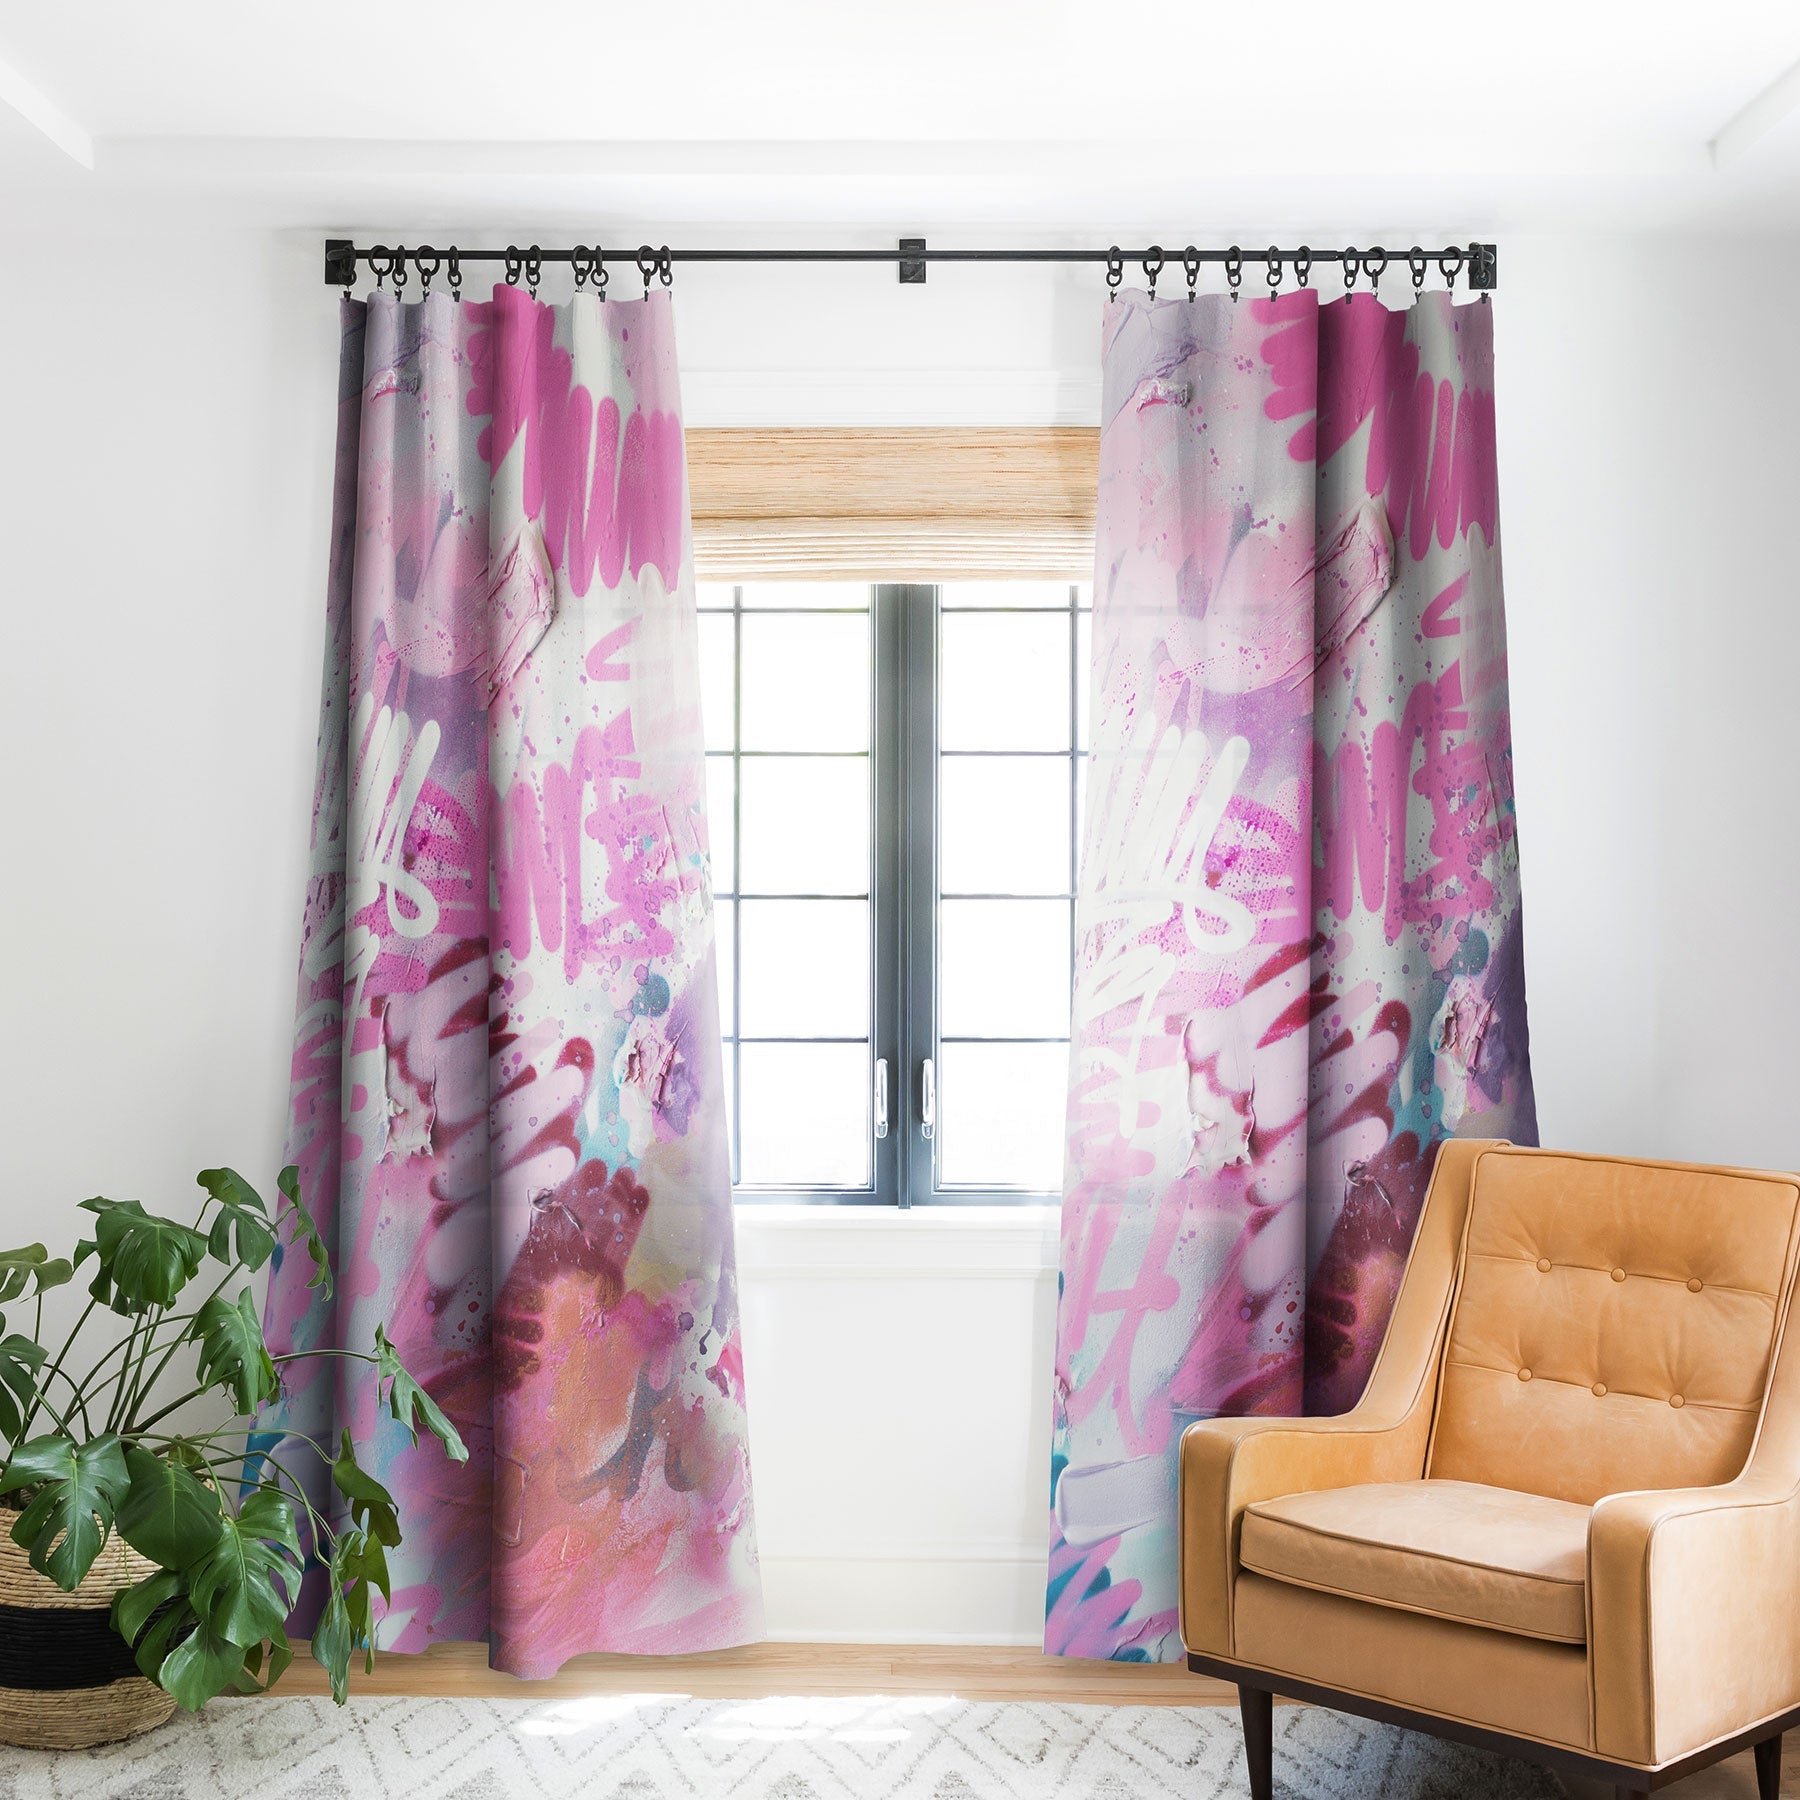 "pink brush" strokes blackout curtains